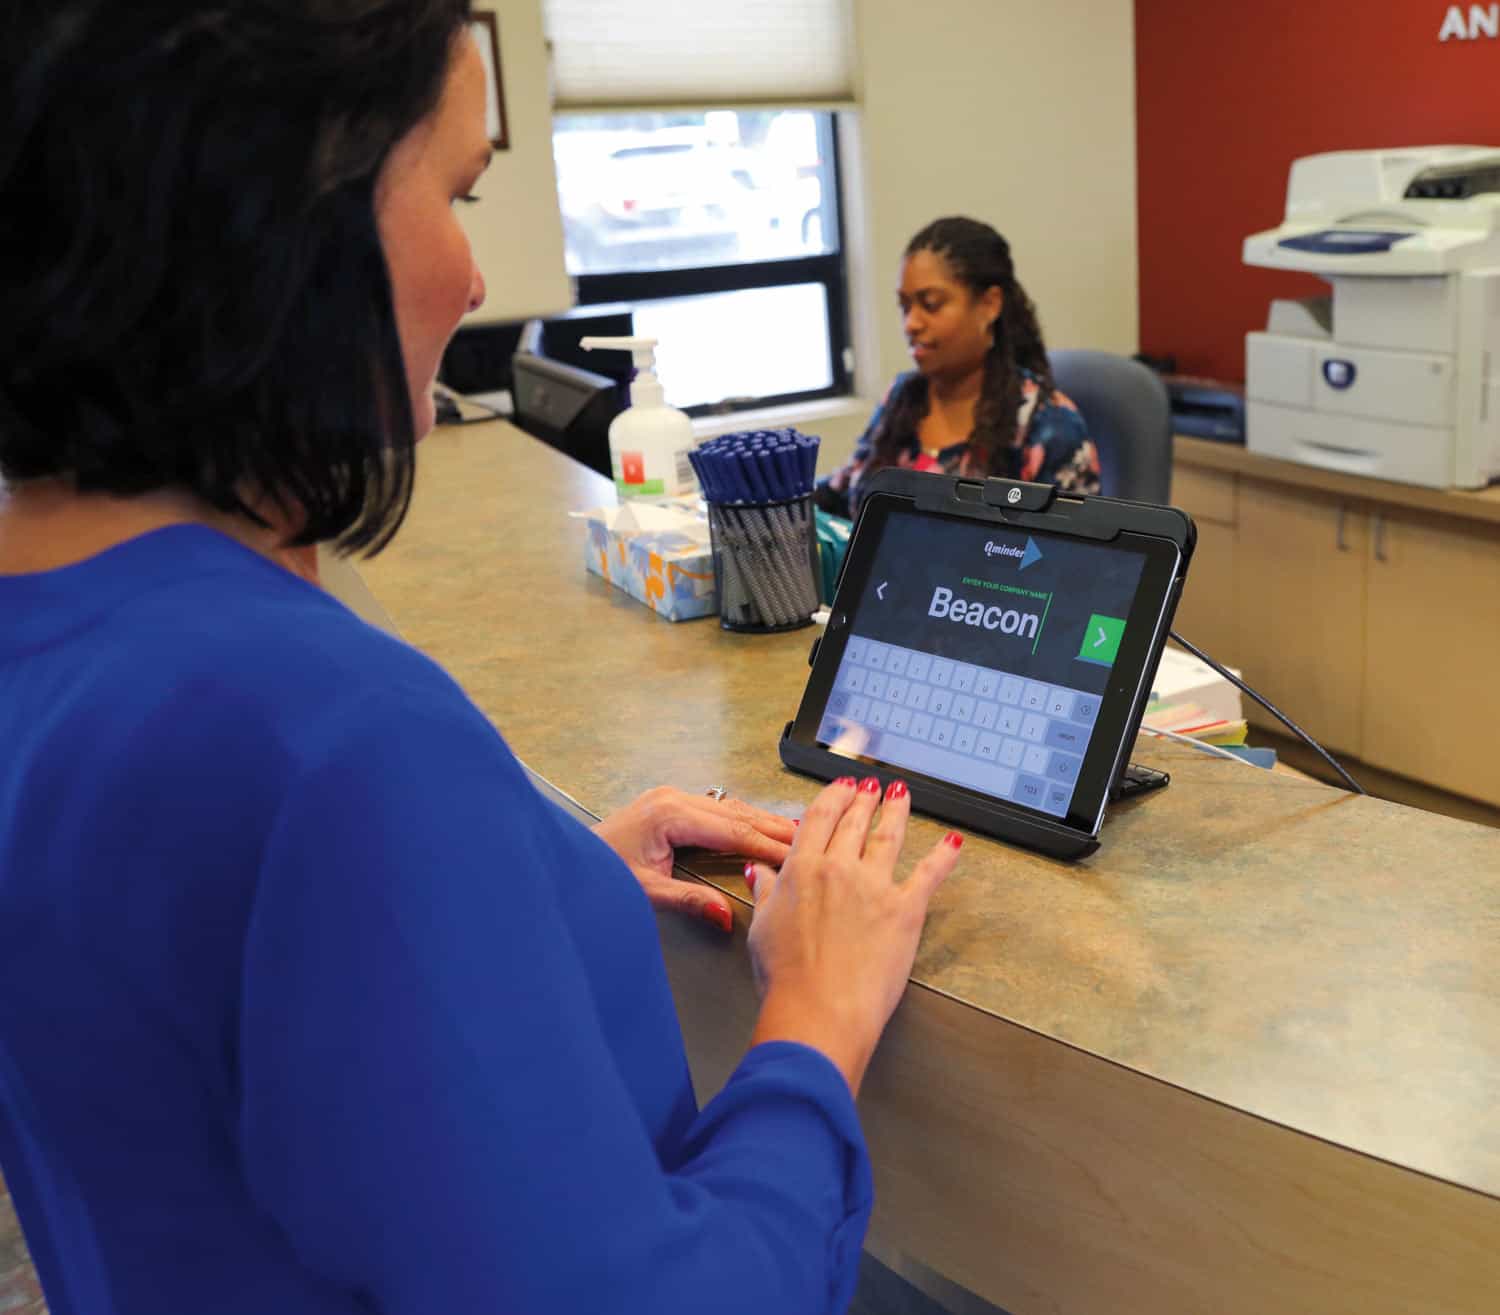 Electric sign-on allows paperless check-in for Beacon customers.